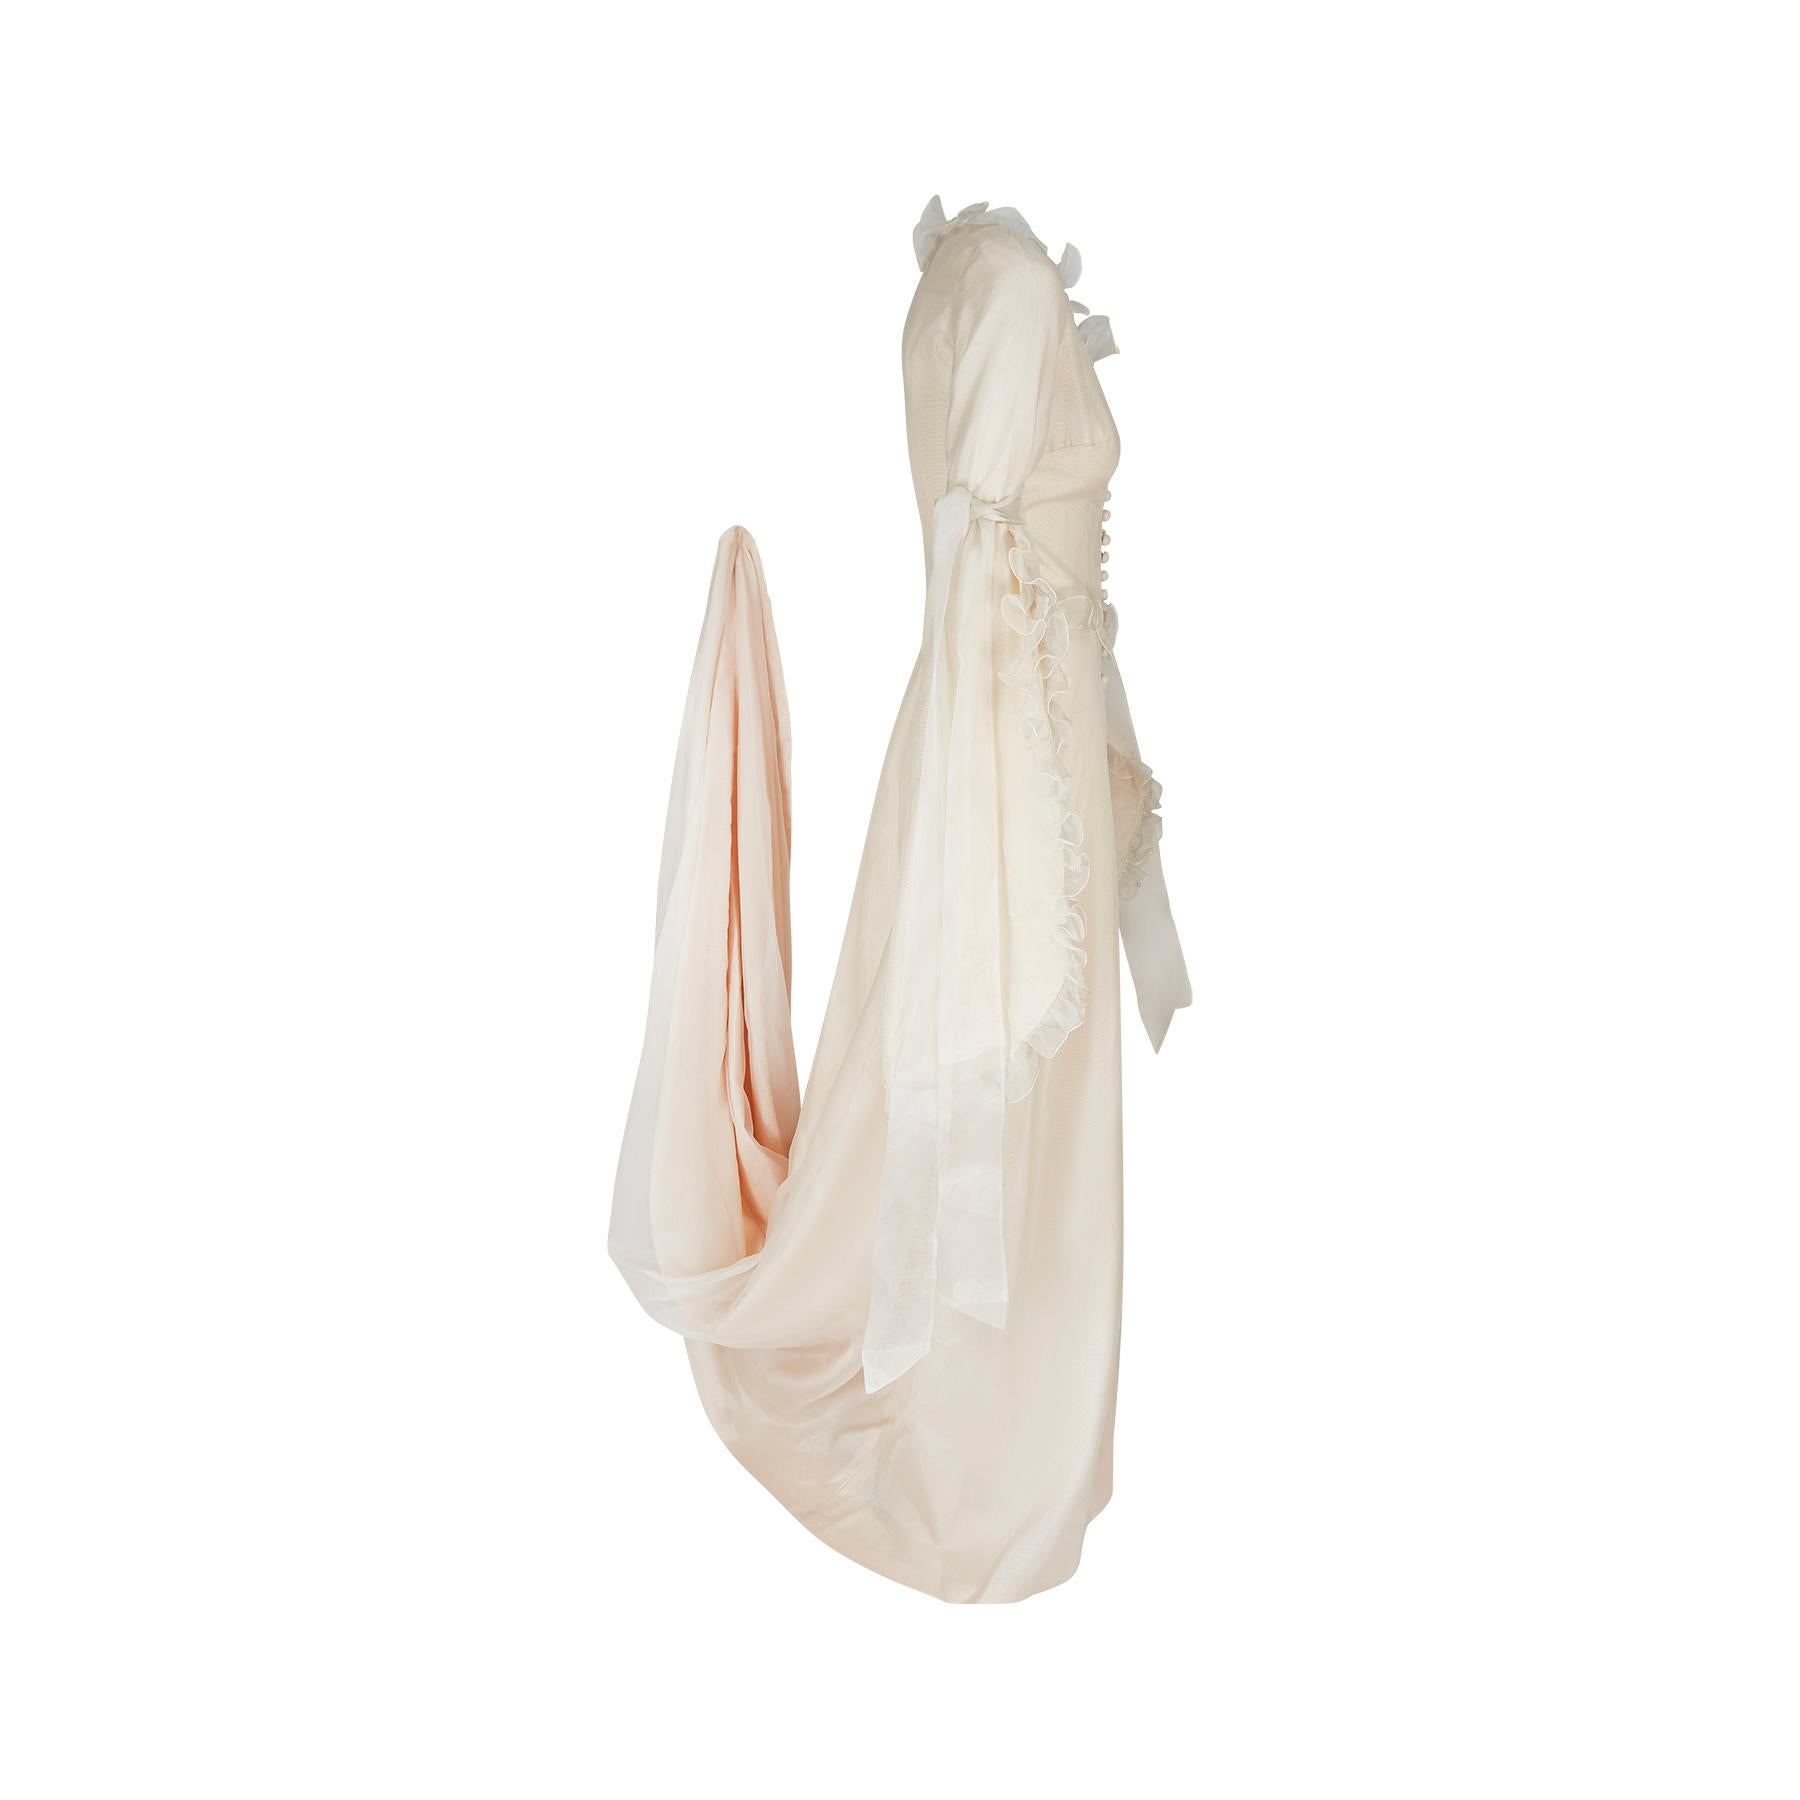 This late 1960s dress by Annacat is really something special and the best we've ever seen from the British design duo Janet Lyle and Maggie Keswick. It is a fairy-tale concoction of cream Georgette overlaid on a peach underdress. It is magnificent